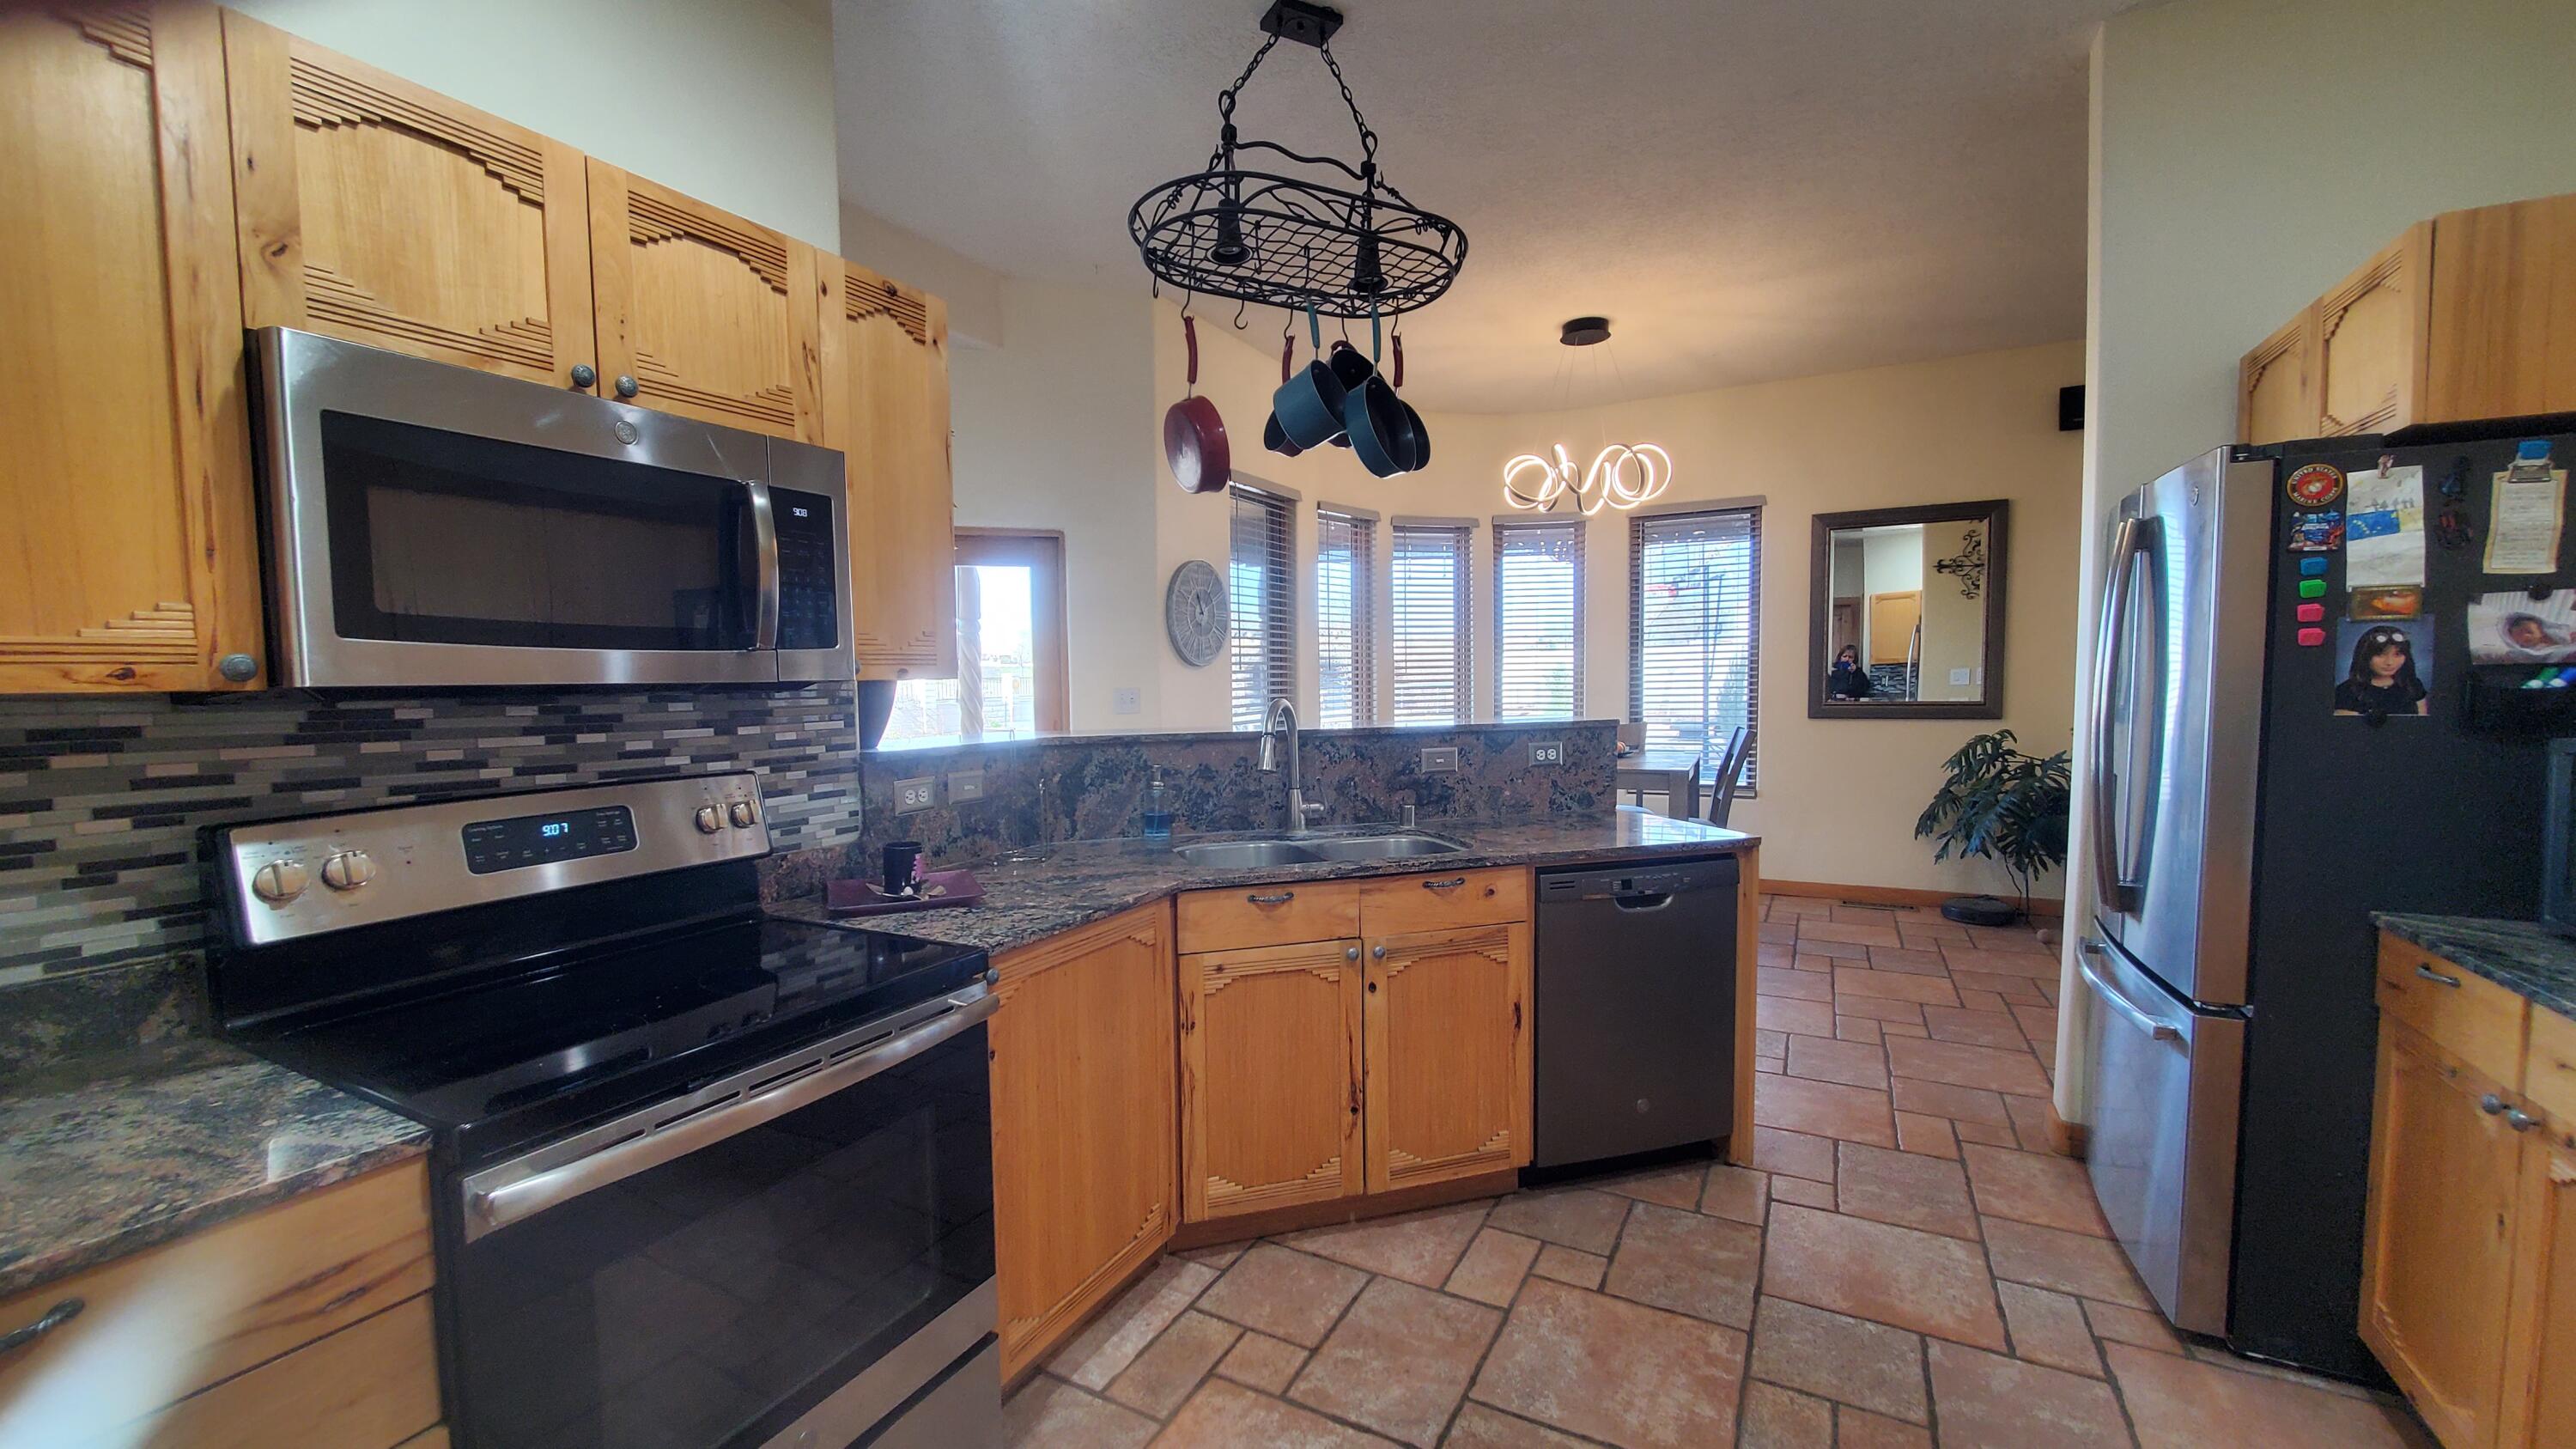 308 Spyglass Place SE, Rio Rancho, New Mexico 87124, 4 Bedrooms Bedrooms, ,4 BathroomsBathrooms,Residential,For Sale,308 Spyglass Place SE,1061573